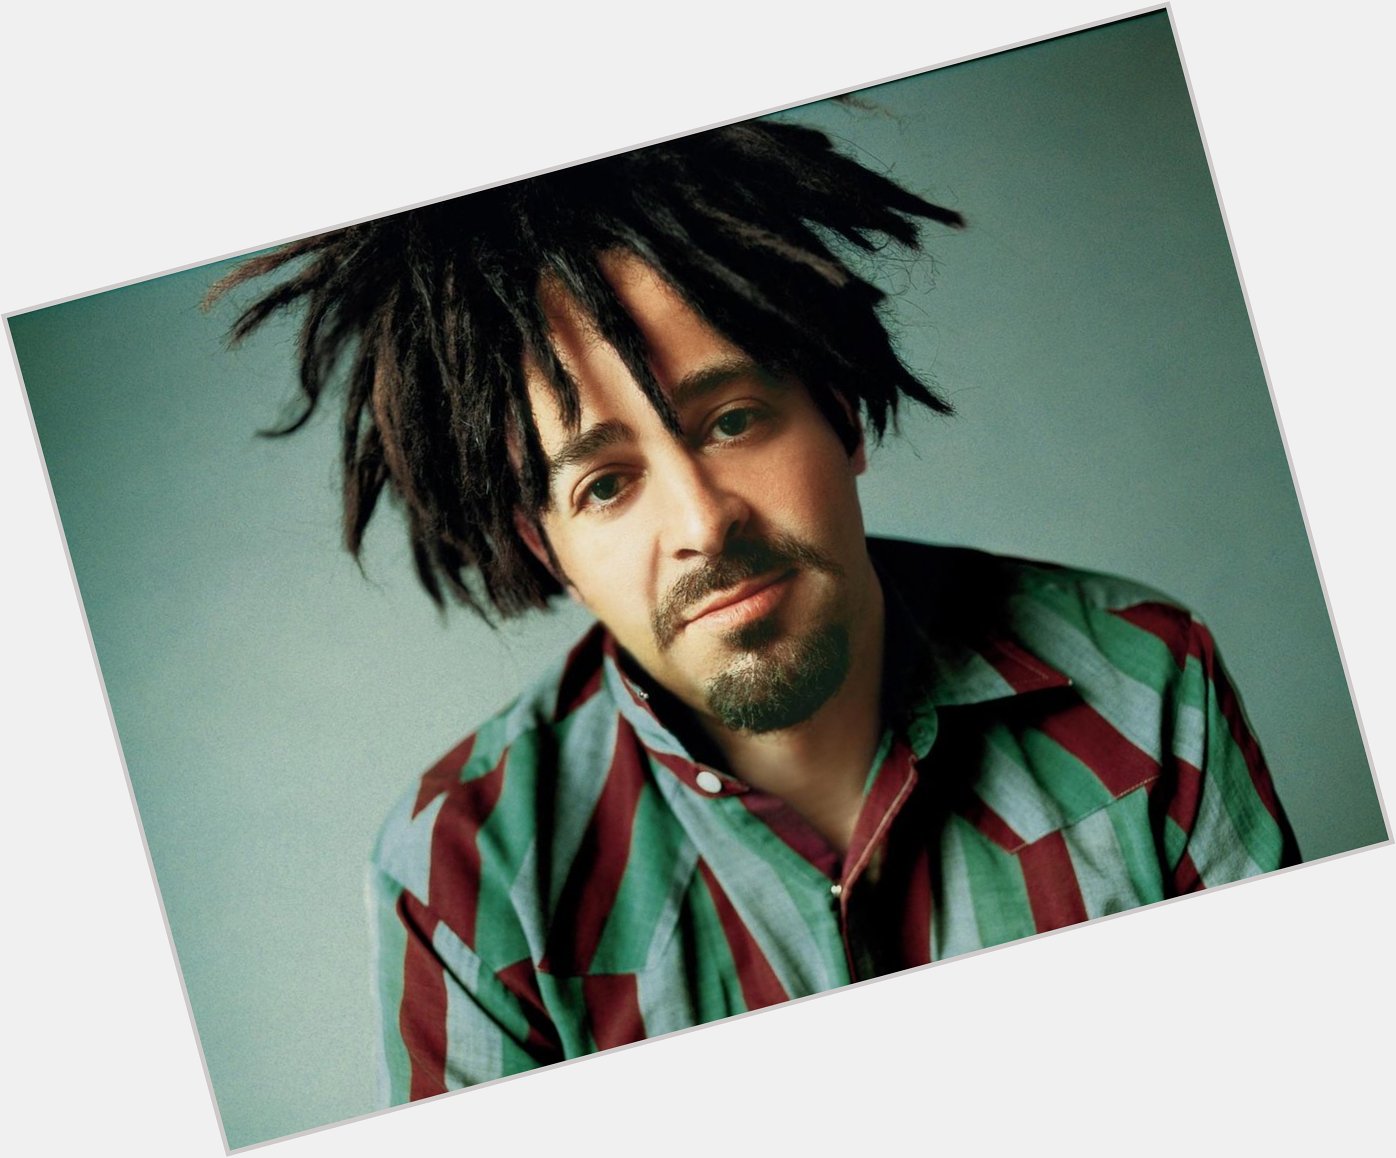 Happy Birthday to Counting Crows singer songwriter Adam Duritz, born on this day in Baltimore, Maryland in 1964.   